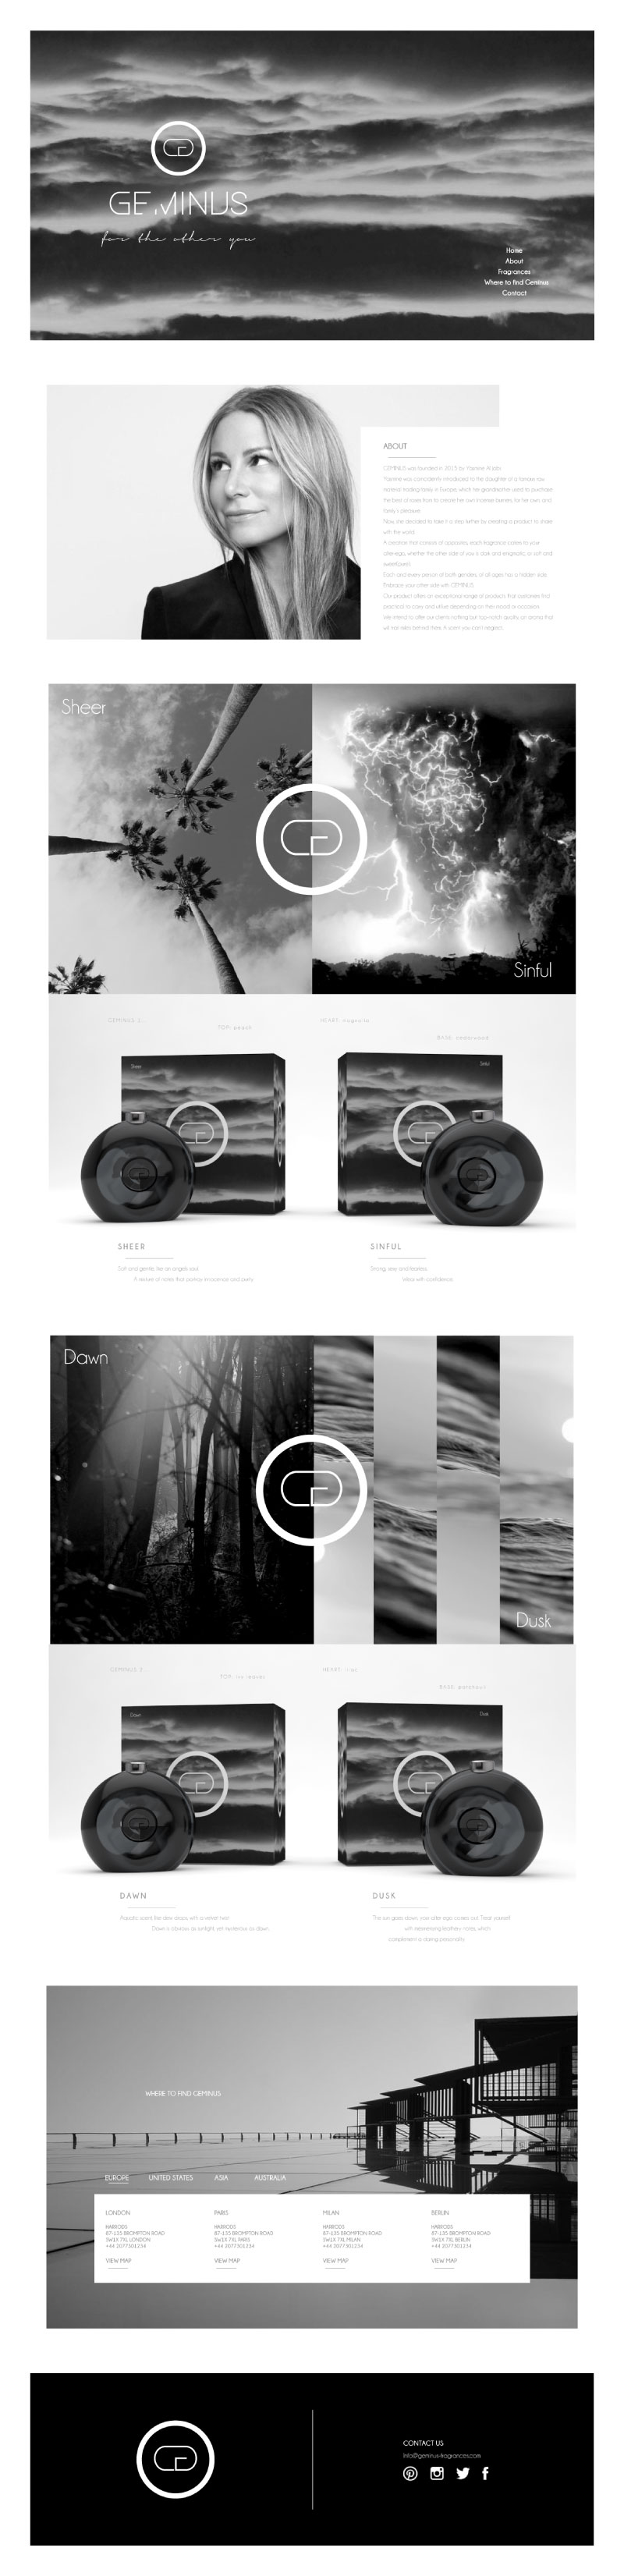 Cafe Studios Design - Homepage Preview _ G Perfumes